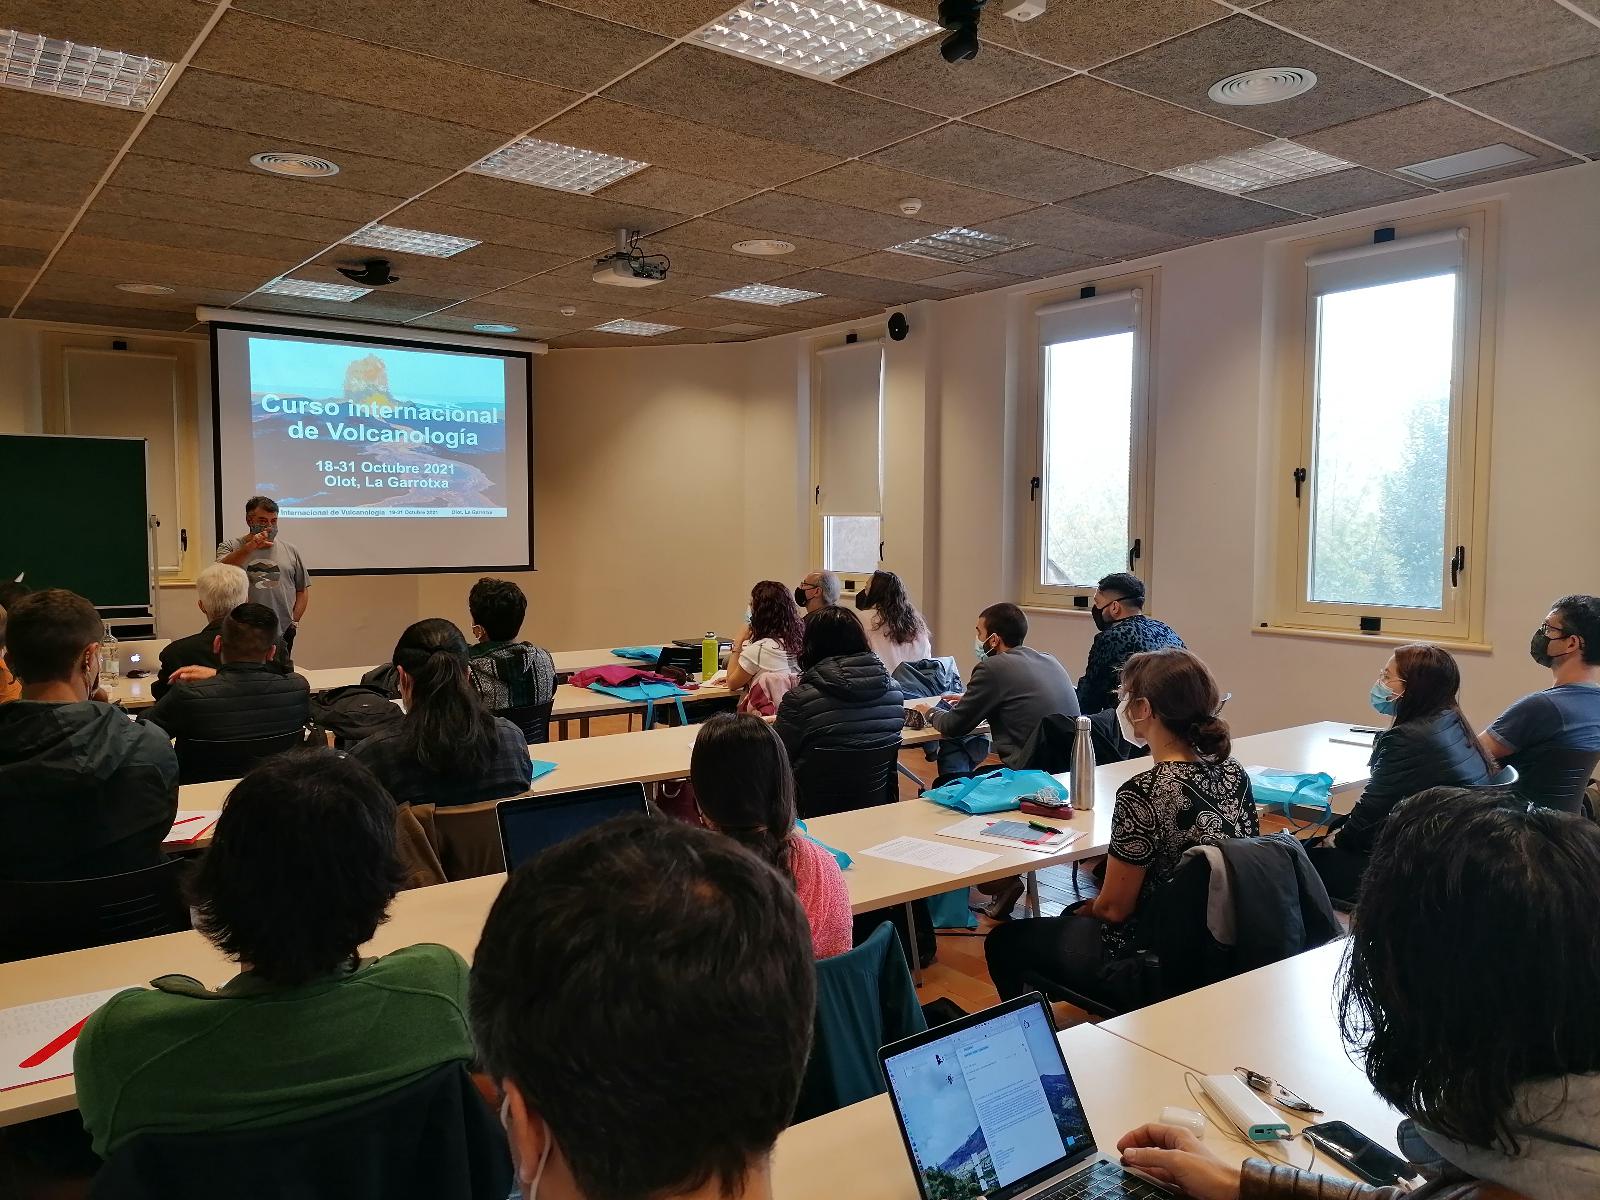 Participation in the 9th edition of the postgraduate course in Volcanology (UdG) for resident experts in volcanology